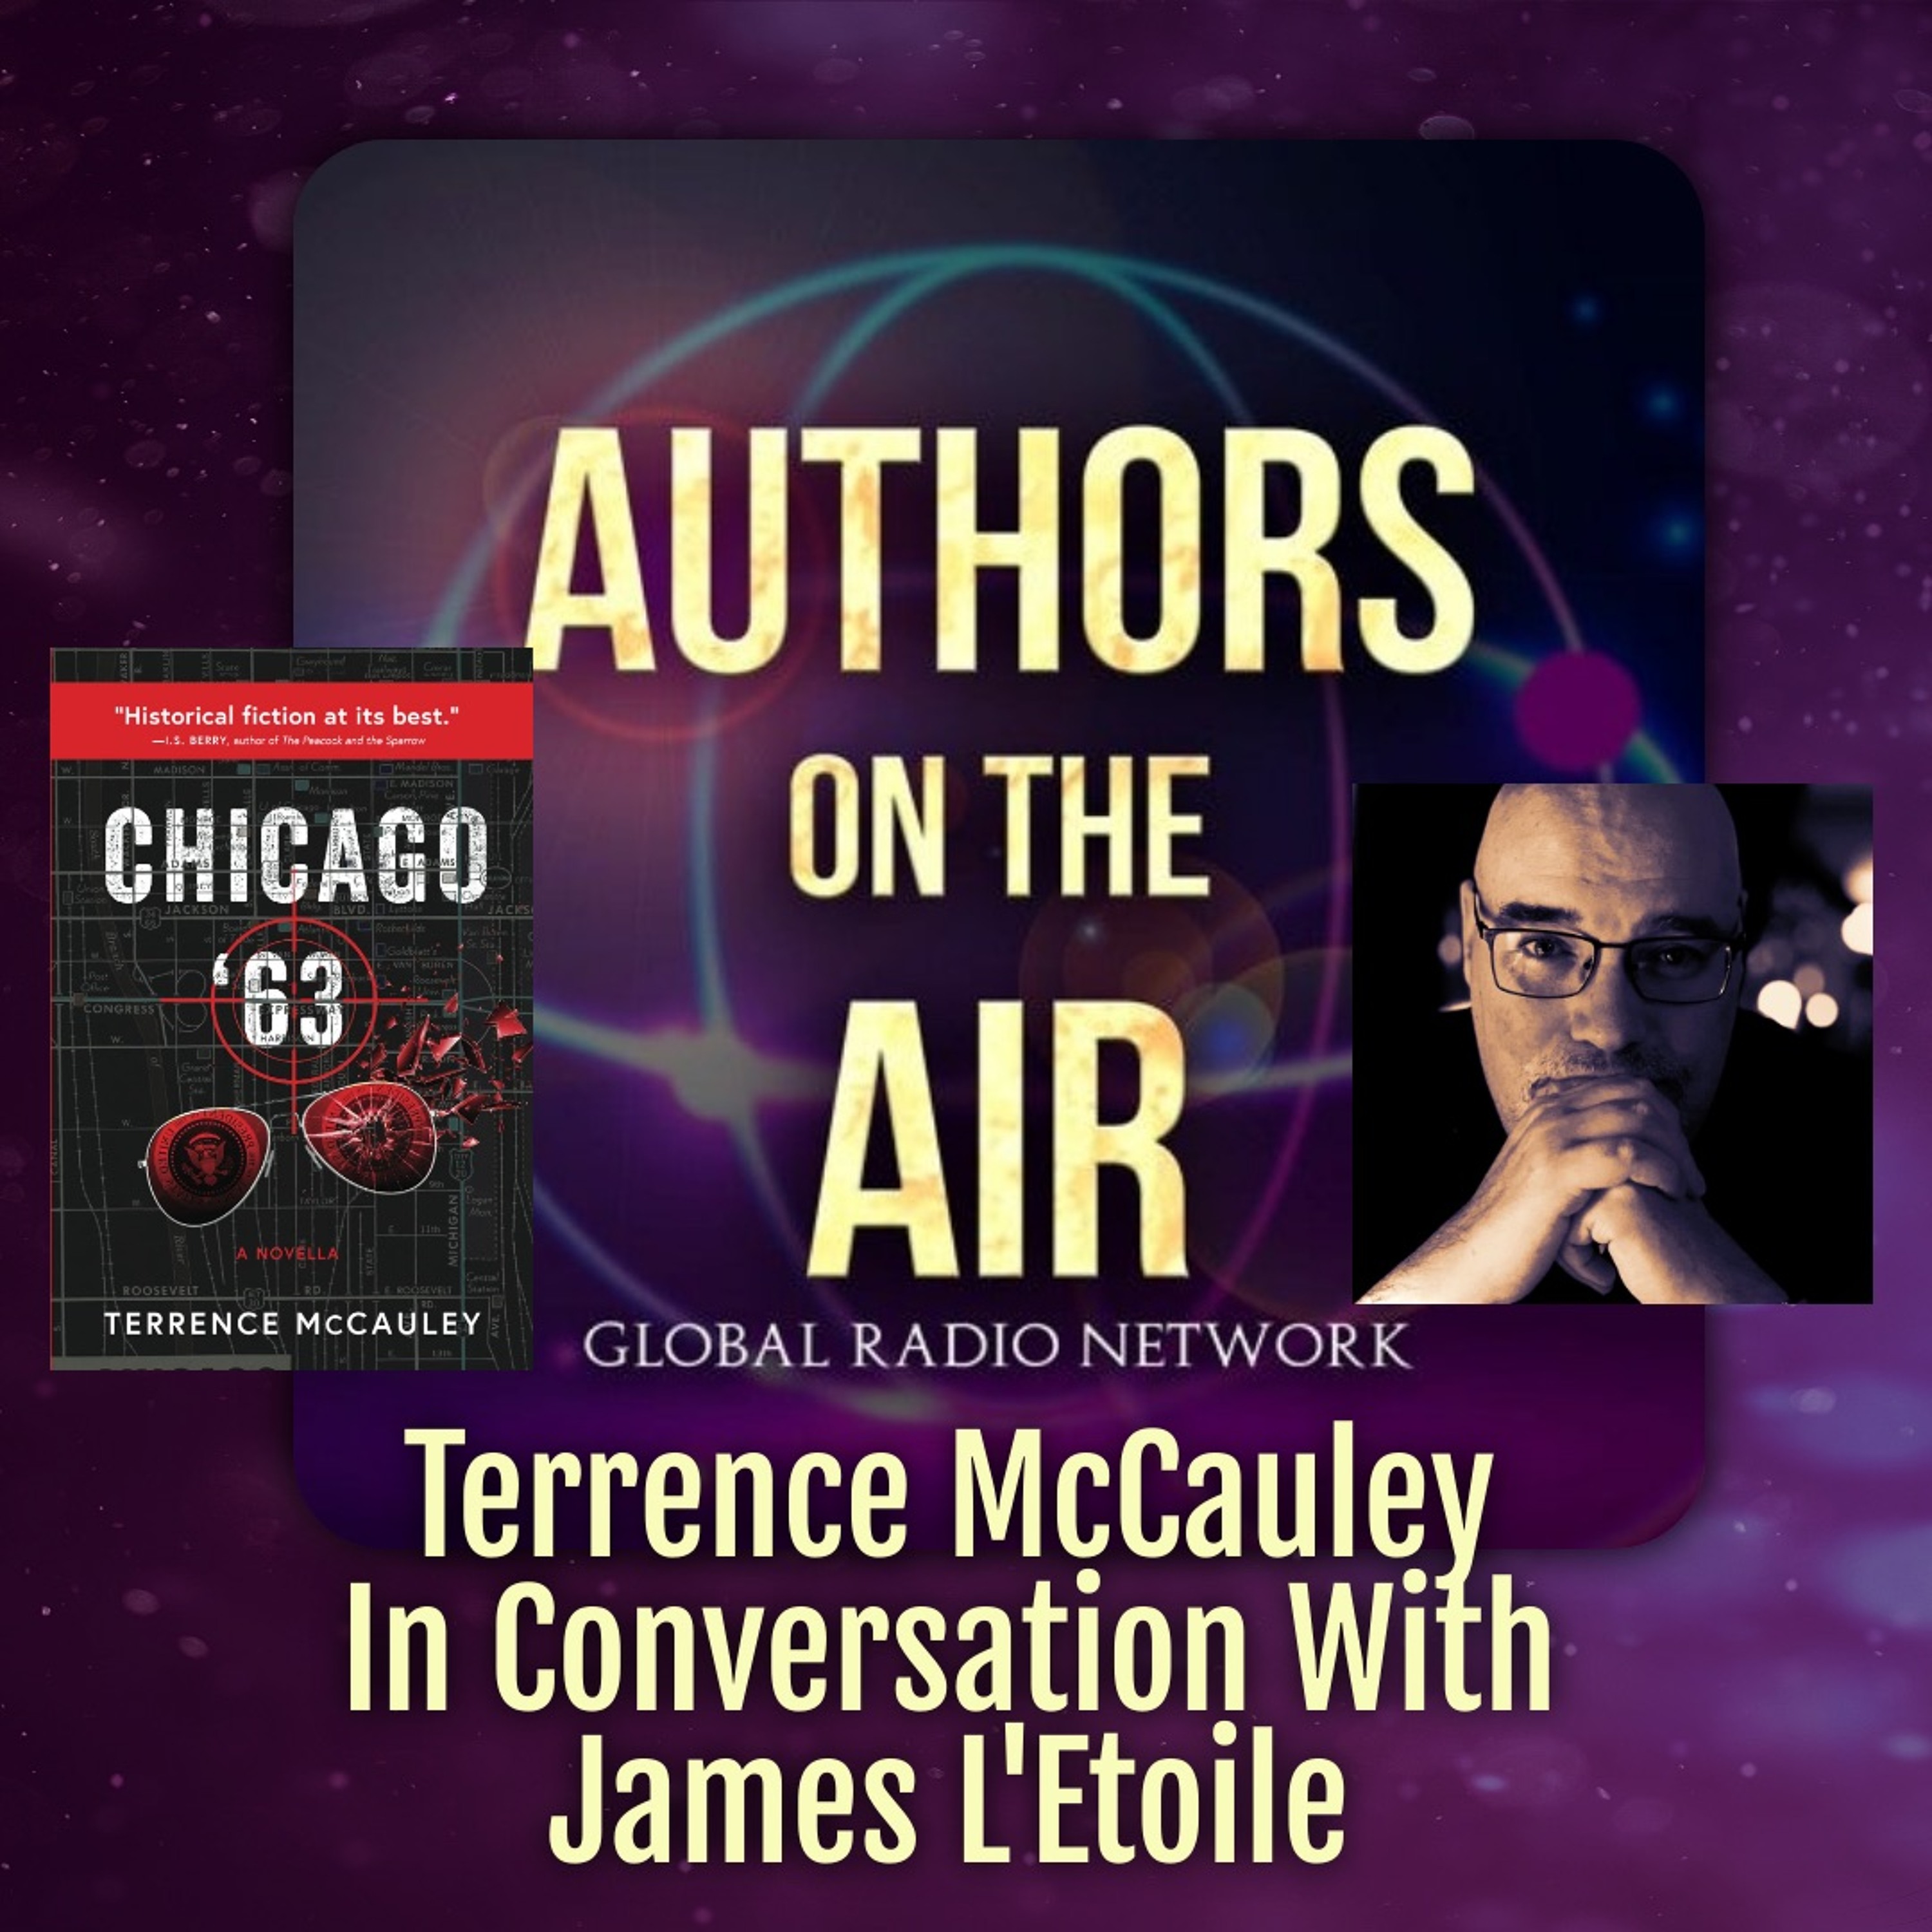 Terrence McCauley - Chicago ’63 Authors on the Air